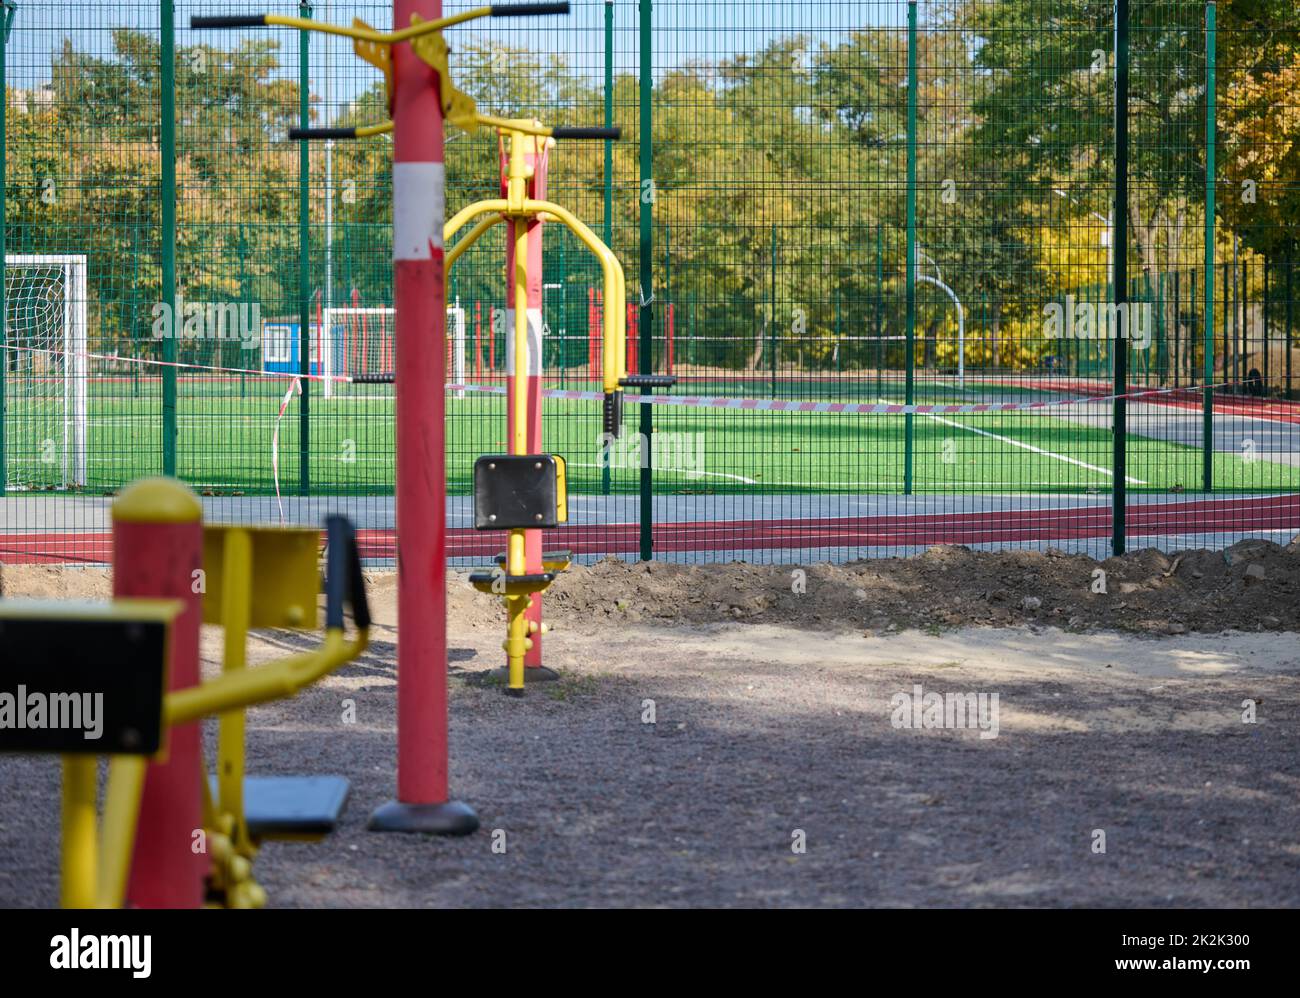 sports equipment in a public park without people, an empty playground during a pandemic and epidemic. Lockdown time Stock Photo